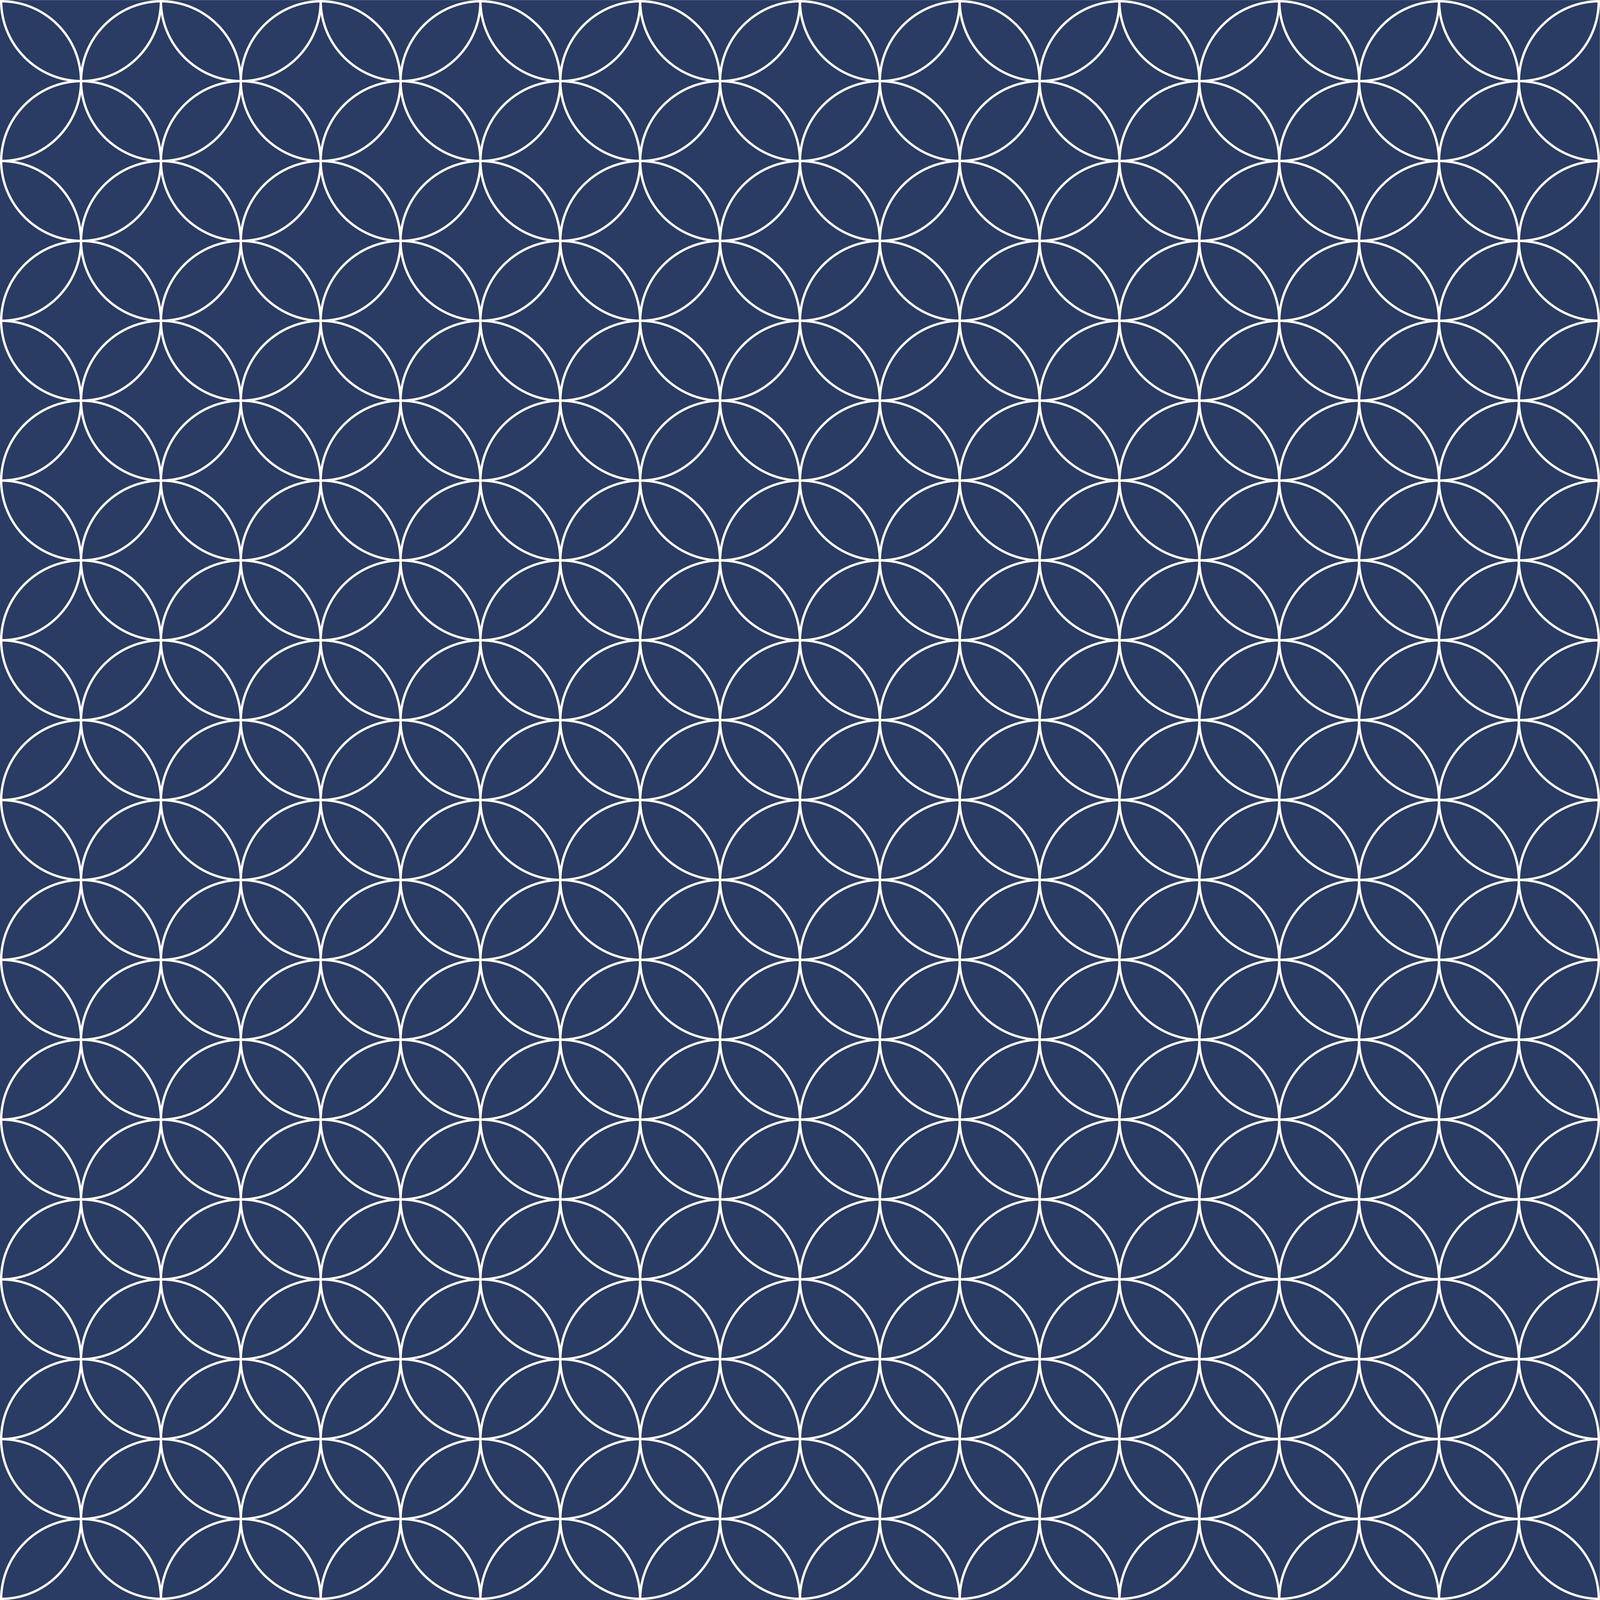 Abstract seamless tile pattern by Bwise